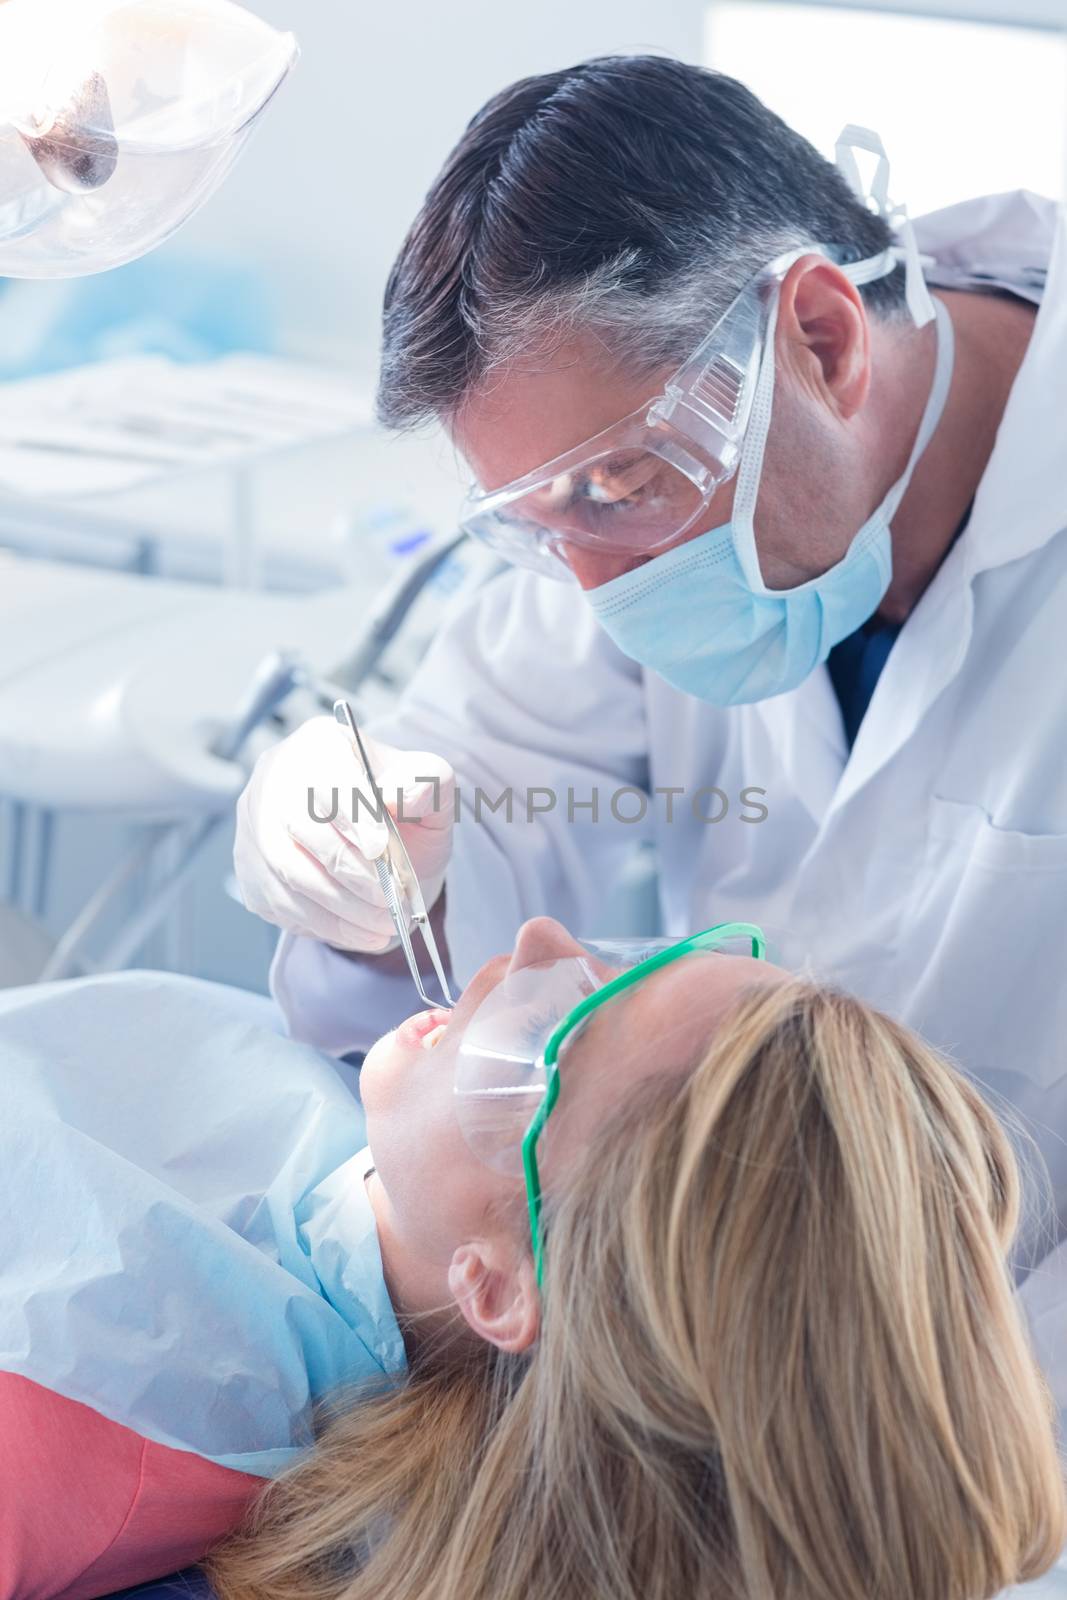 Dentist in surgical mask and gloves holding tool at the dental clinic